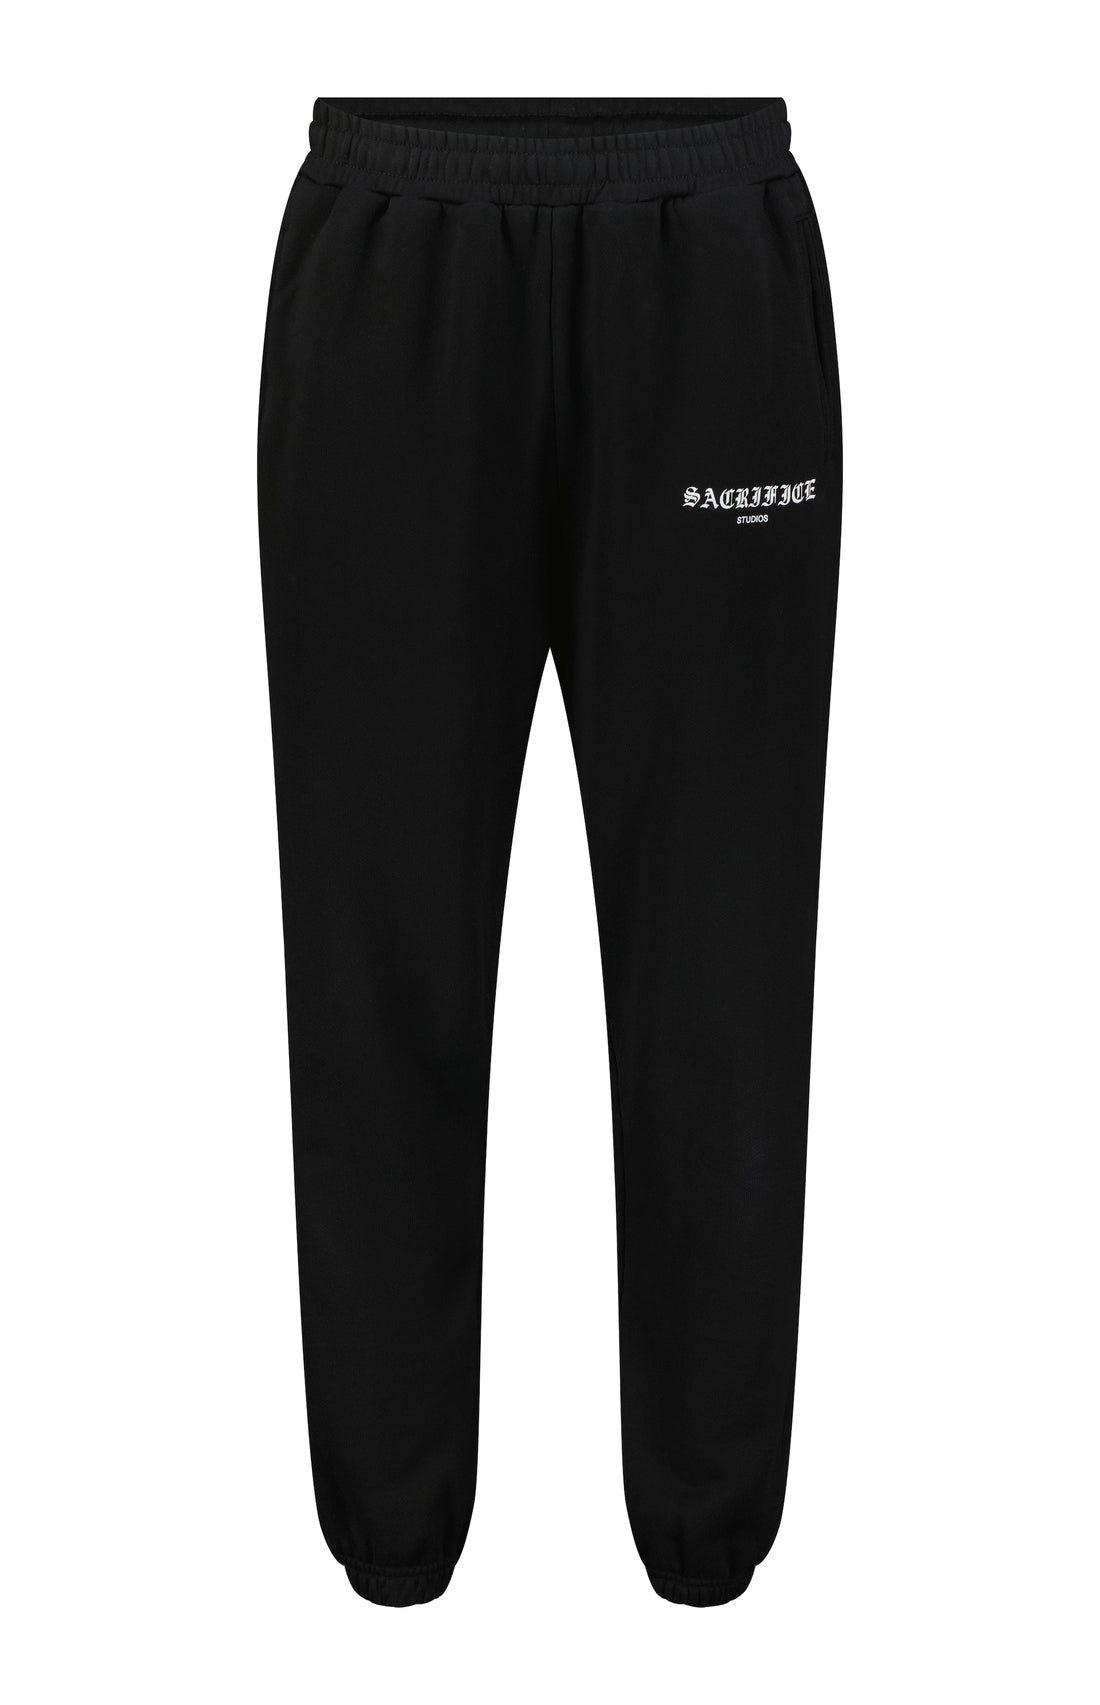 Premium Streetwear Heavy-weight Sweatpant. Expertly crafted in Portugal. Located in Dubai.